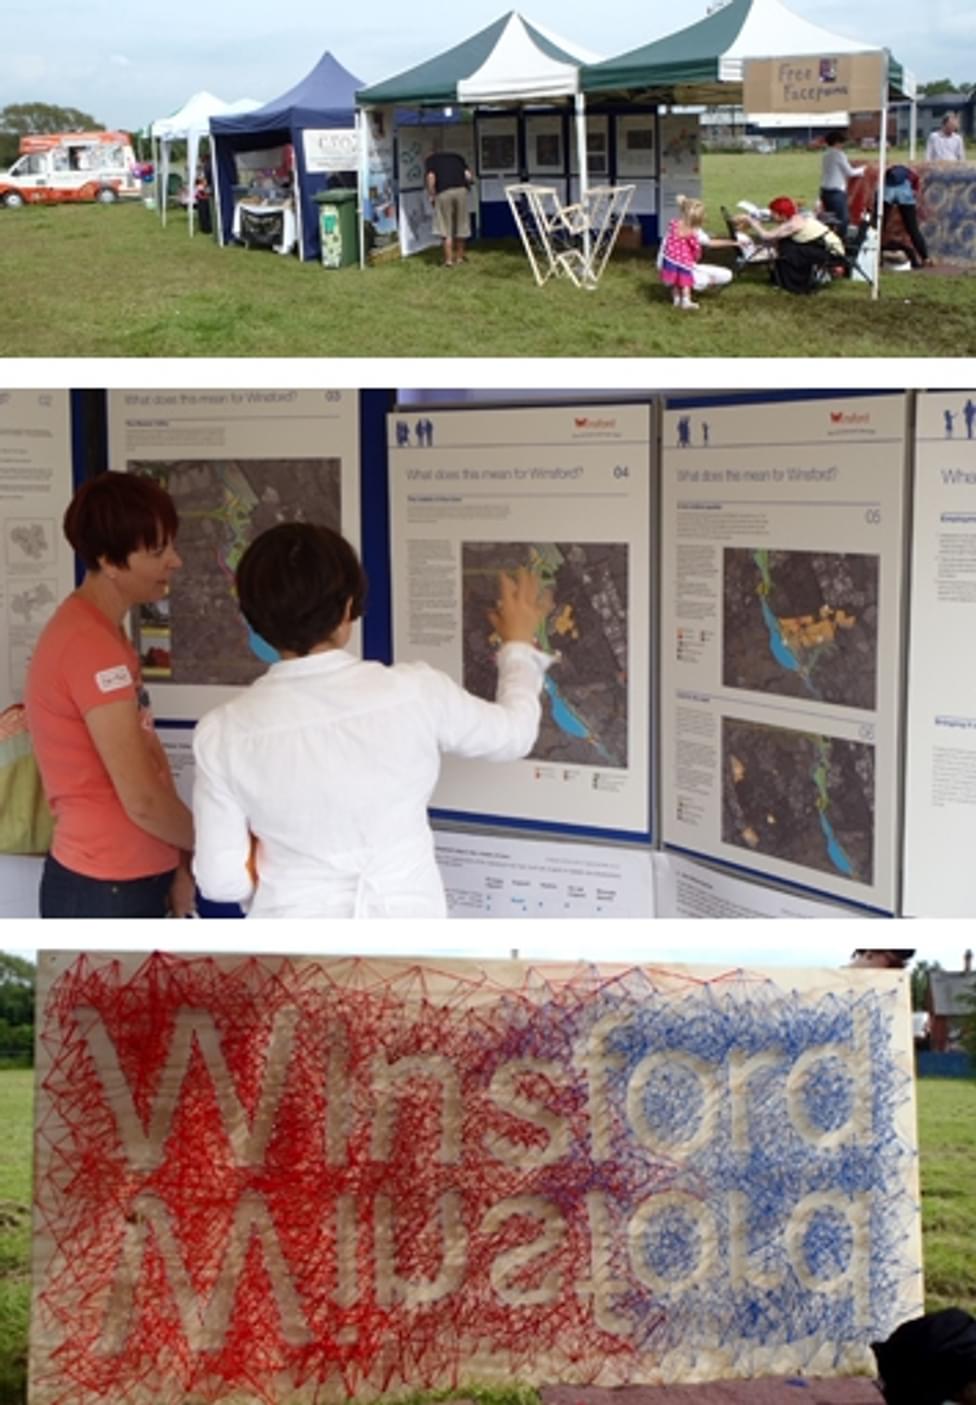 Winsford-featured